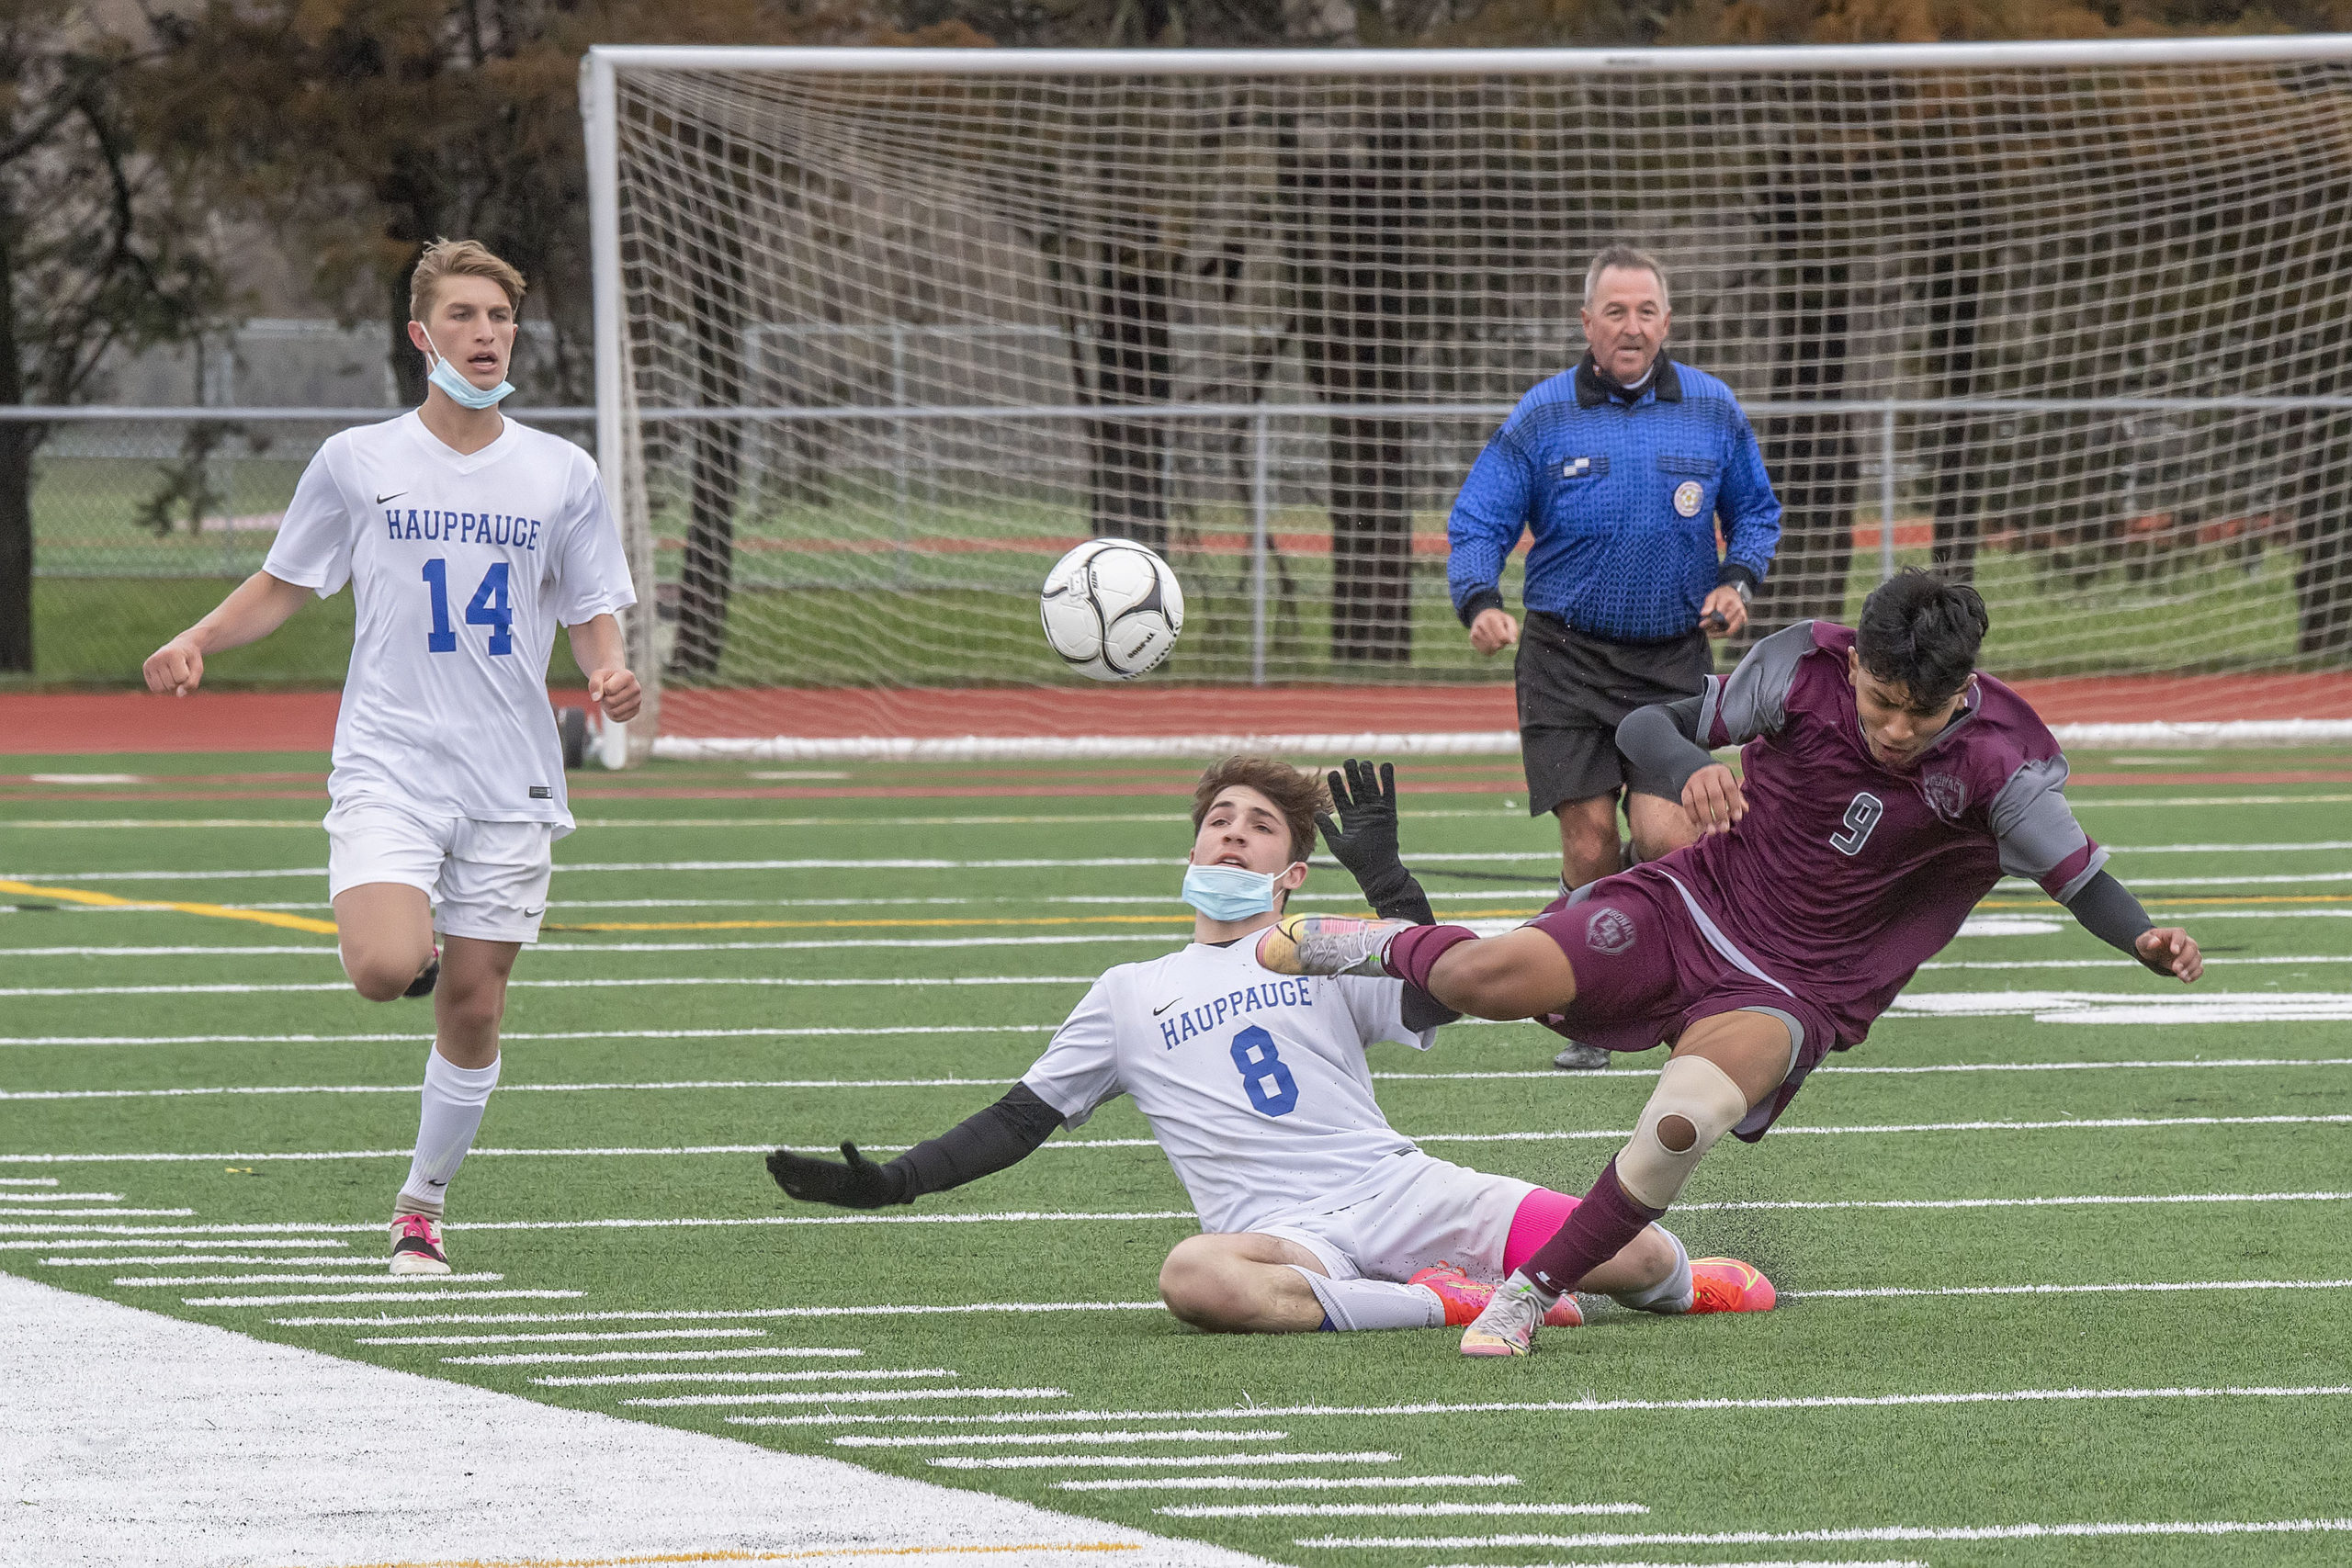 East Hampton sophomore Eric Armijos and a Hauppauge player both go down to the turf.